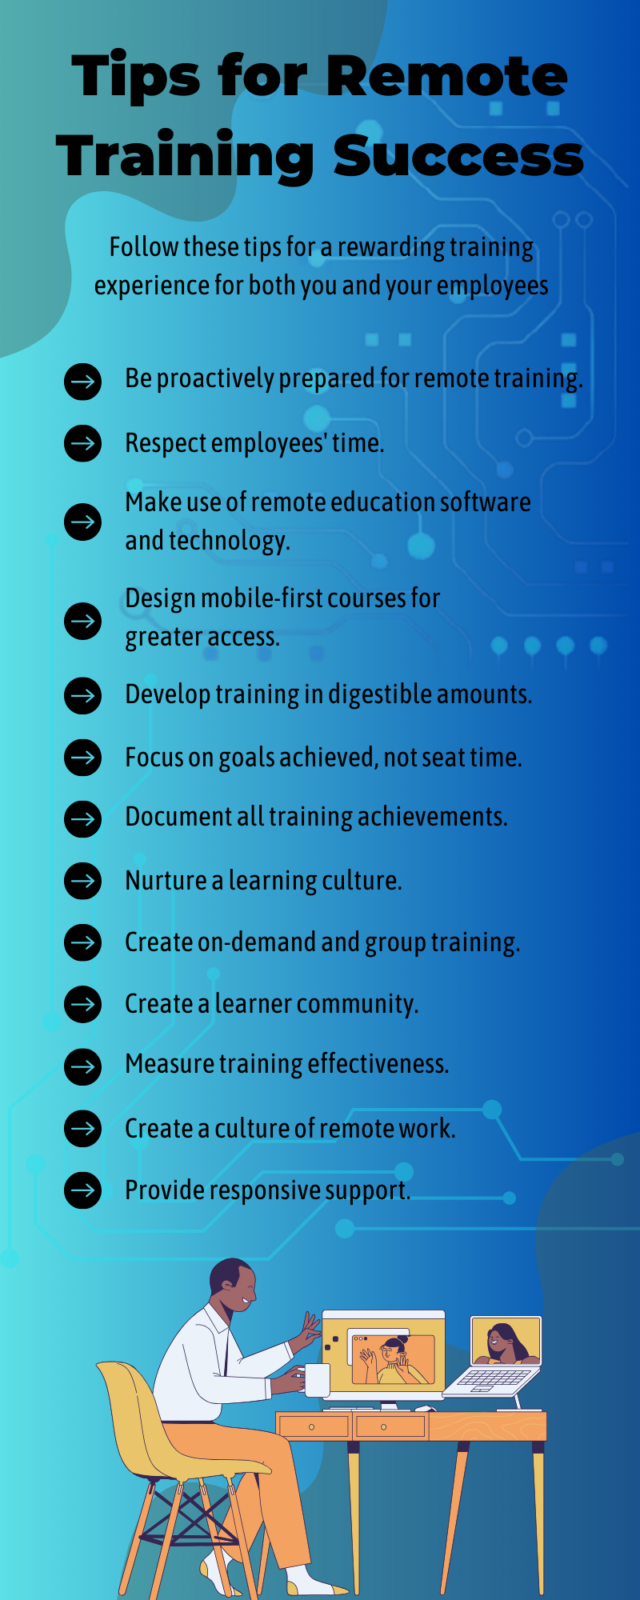 Alt text: A blue gradient background. The writing reads, "Tips for Remote Training Success: 1. Be proactively prepared for remote training; 2. Respect employees’ time; 3. Make use of remote education software and technology; 4. Design mobile-first courses for greater access; 5. Develop training in digestible amounts; 6. Focus on goals achieved, not seat time; 7. Document all training achievements; 8. Measure training effectiveness; 9. Create on-demand and group training; 10. Create a learner community; 11. Nurture a learning culture; 12. Create a culture of remote work; 13. Provide responsive support."